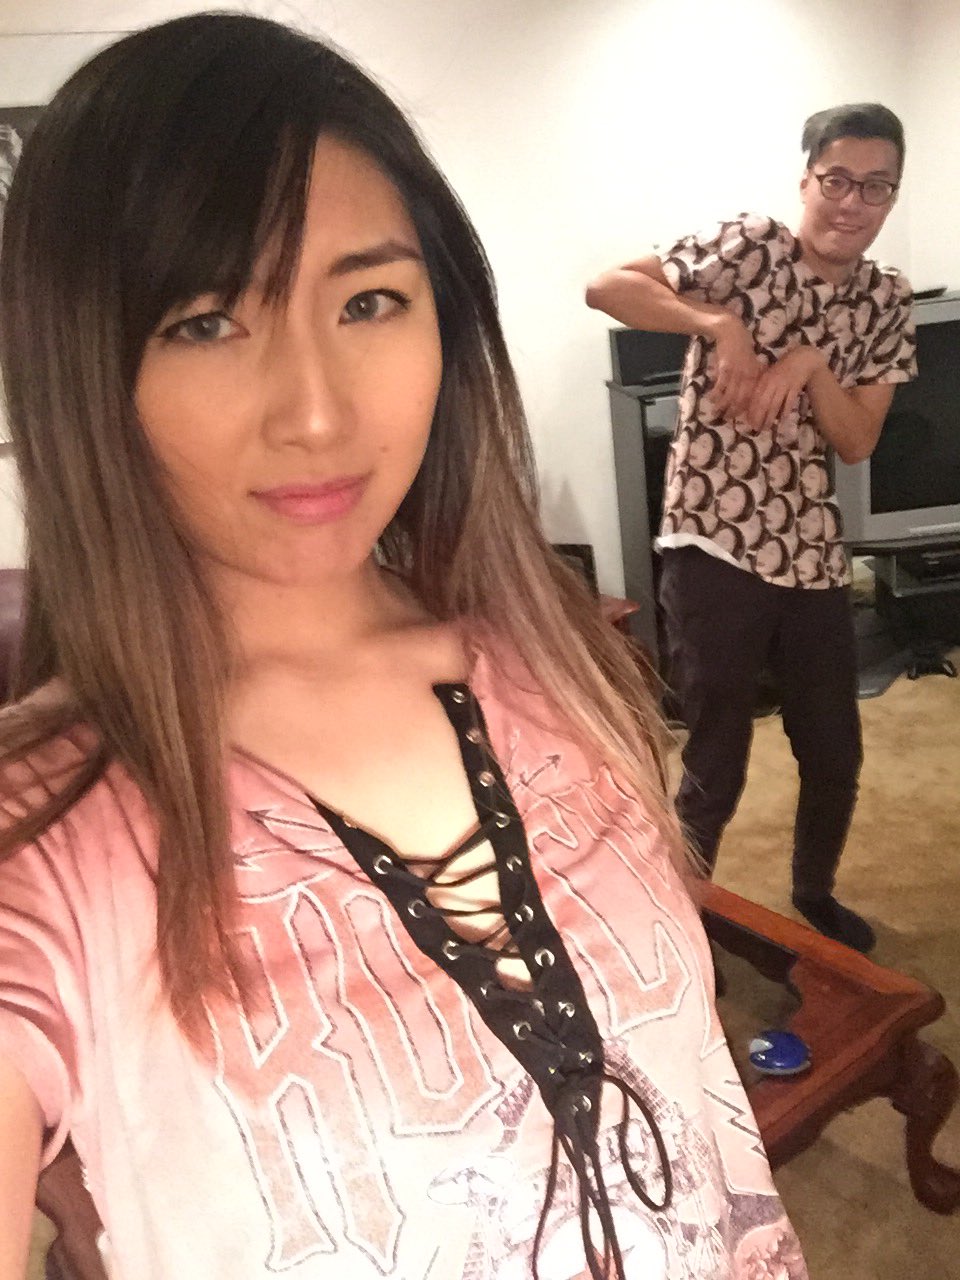 Wildturtle xchocobars dating Before you